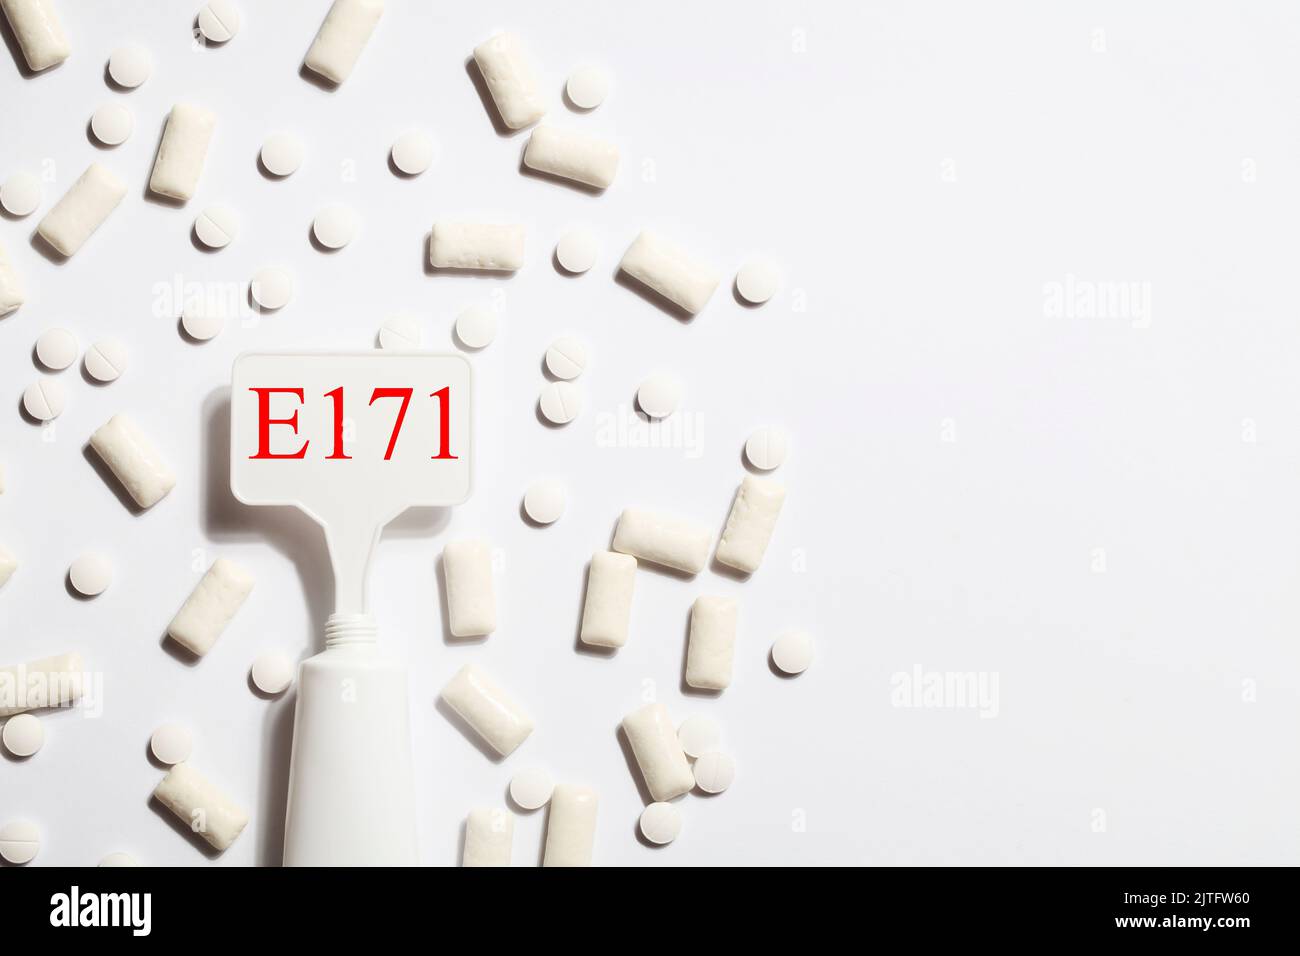 Titanium dioxide, E171, dangerous additive concept. gum, pills, toothpaste or cream and sign with E171 on white background. copy space Stock Photo